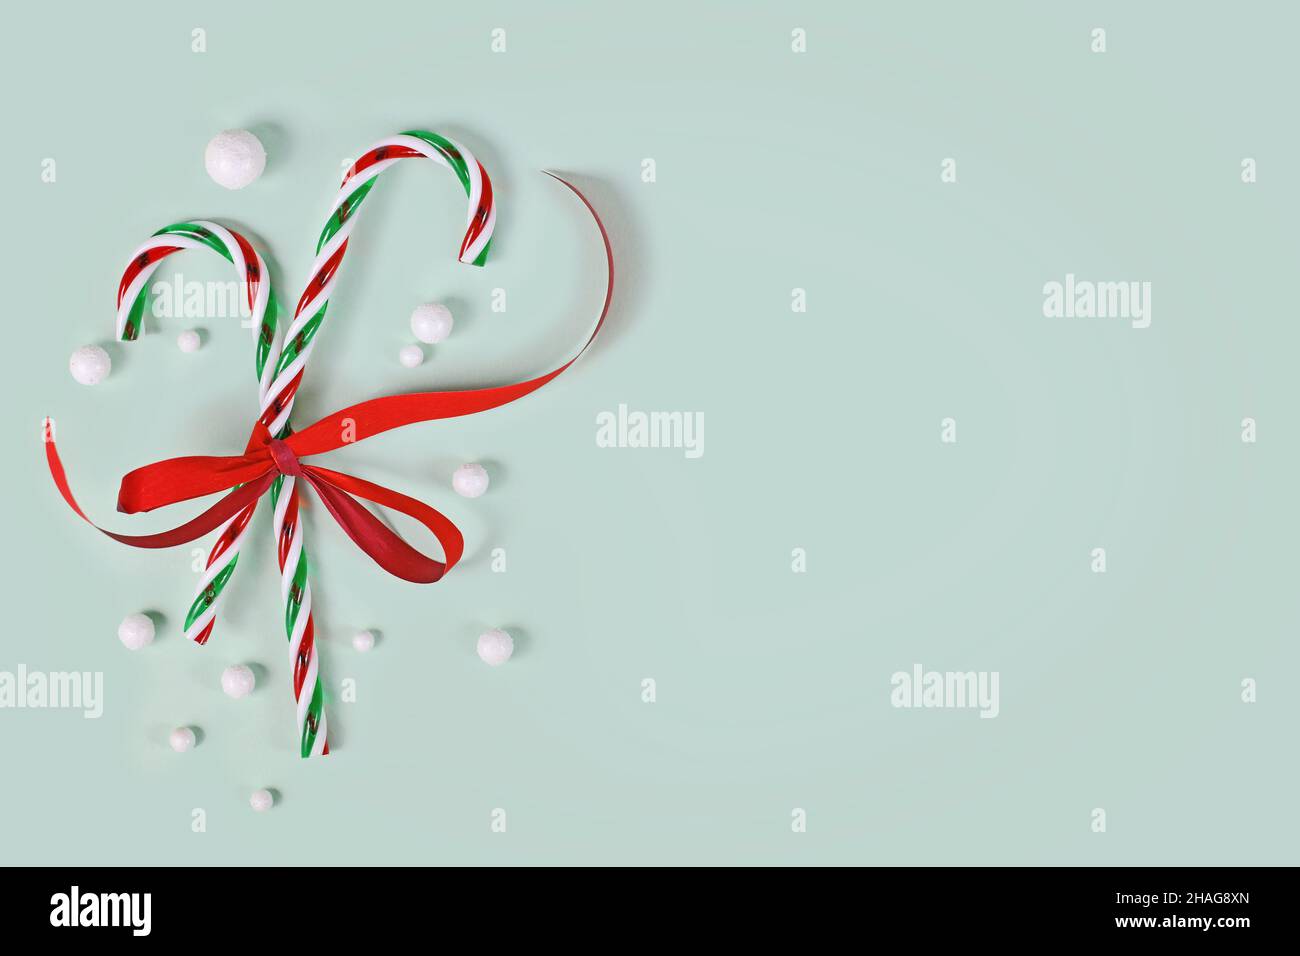 Two striped candy canes tied together with red ribbon on side of mint green background with copy space Stock Photo